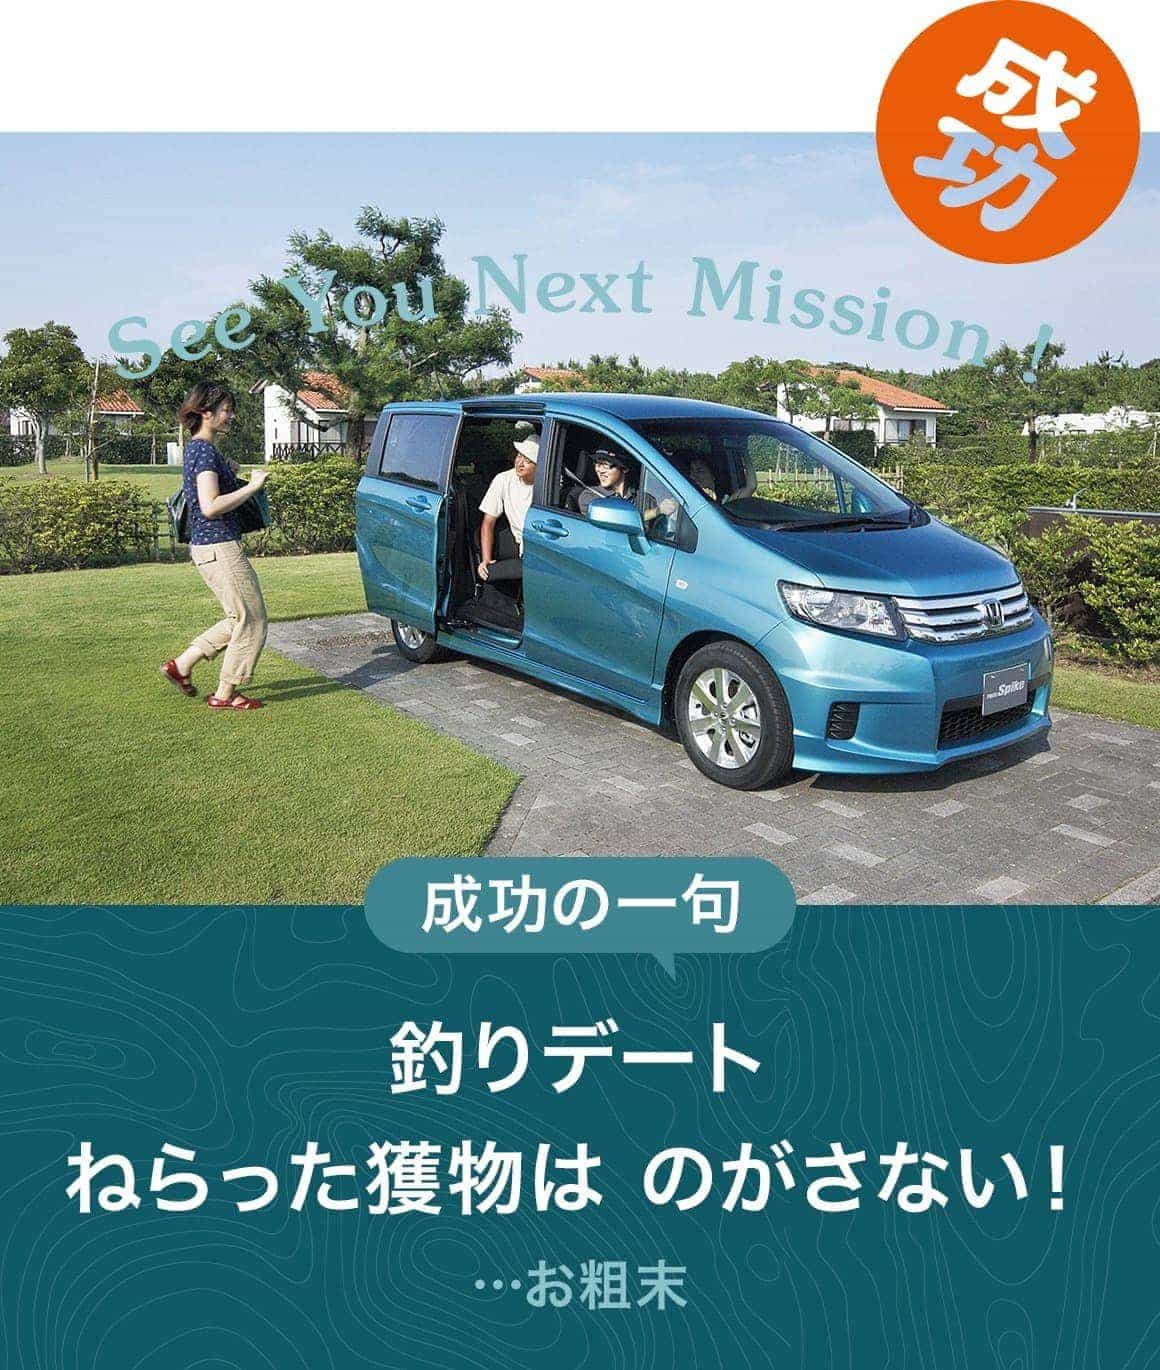 SEE YOU NEXT MISSION! | 成功　成功の一句「釣りデート ねらった獲物は のがさない！」